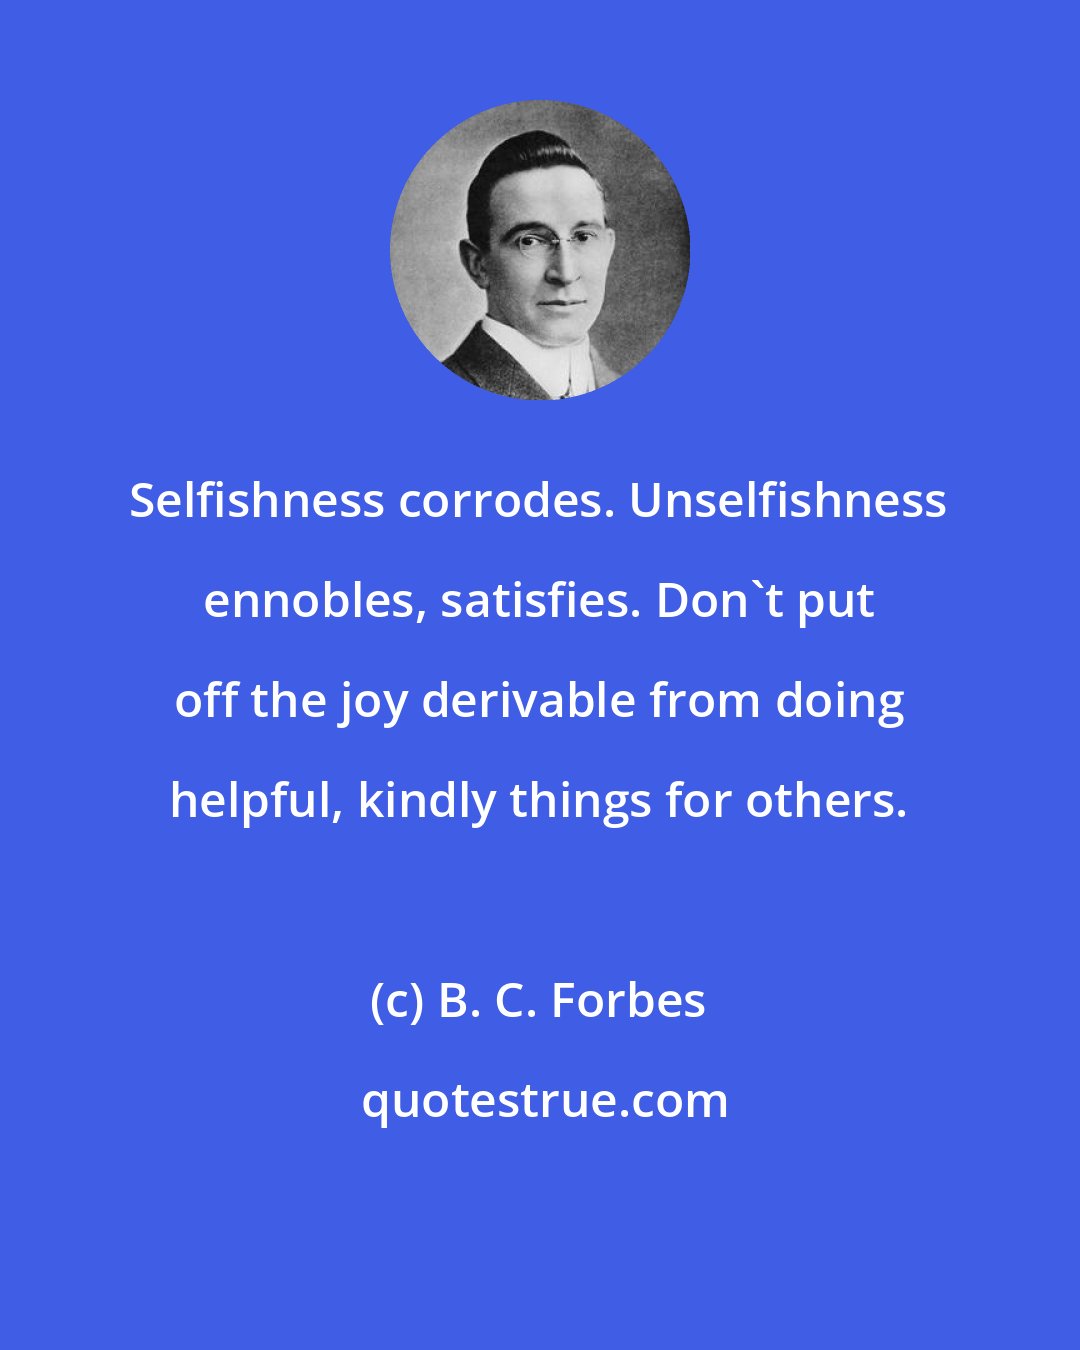 B. C. Forbes: Selfishness corrodes. Unselfishness ennobles, satisfies. Don't put off the joy derivable from doing helpful, kindly things for others.